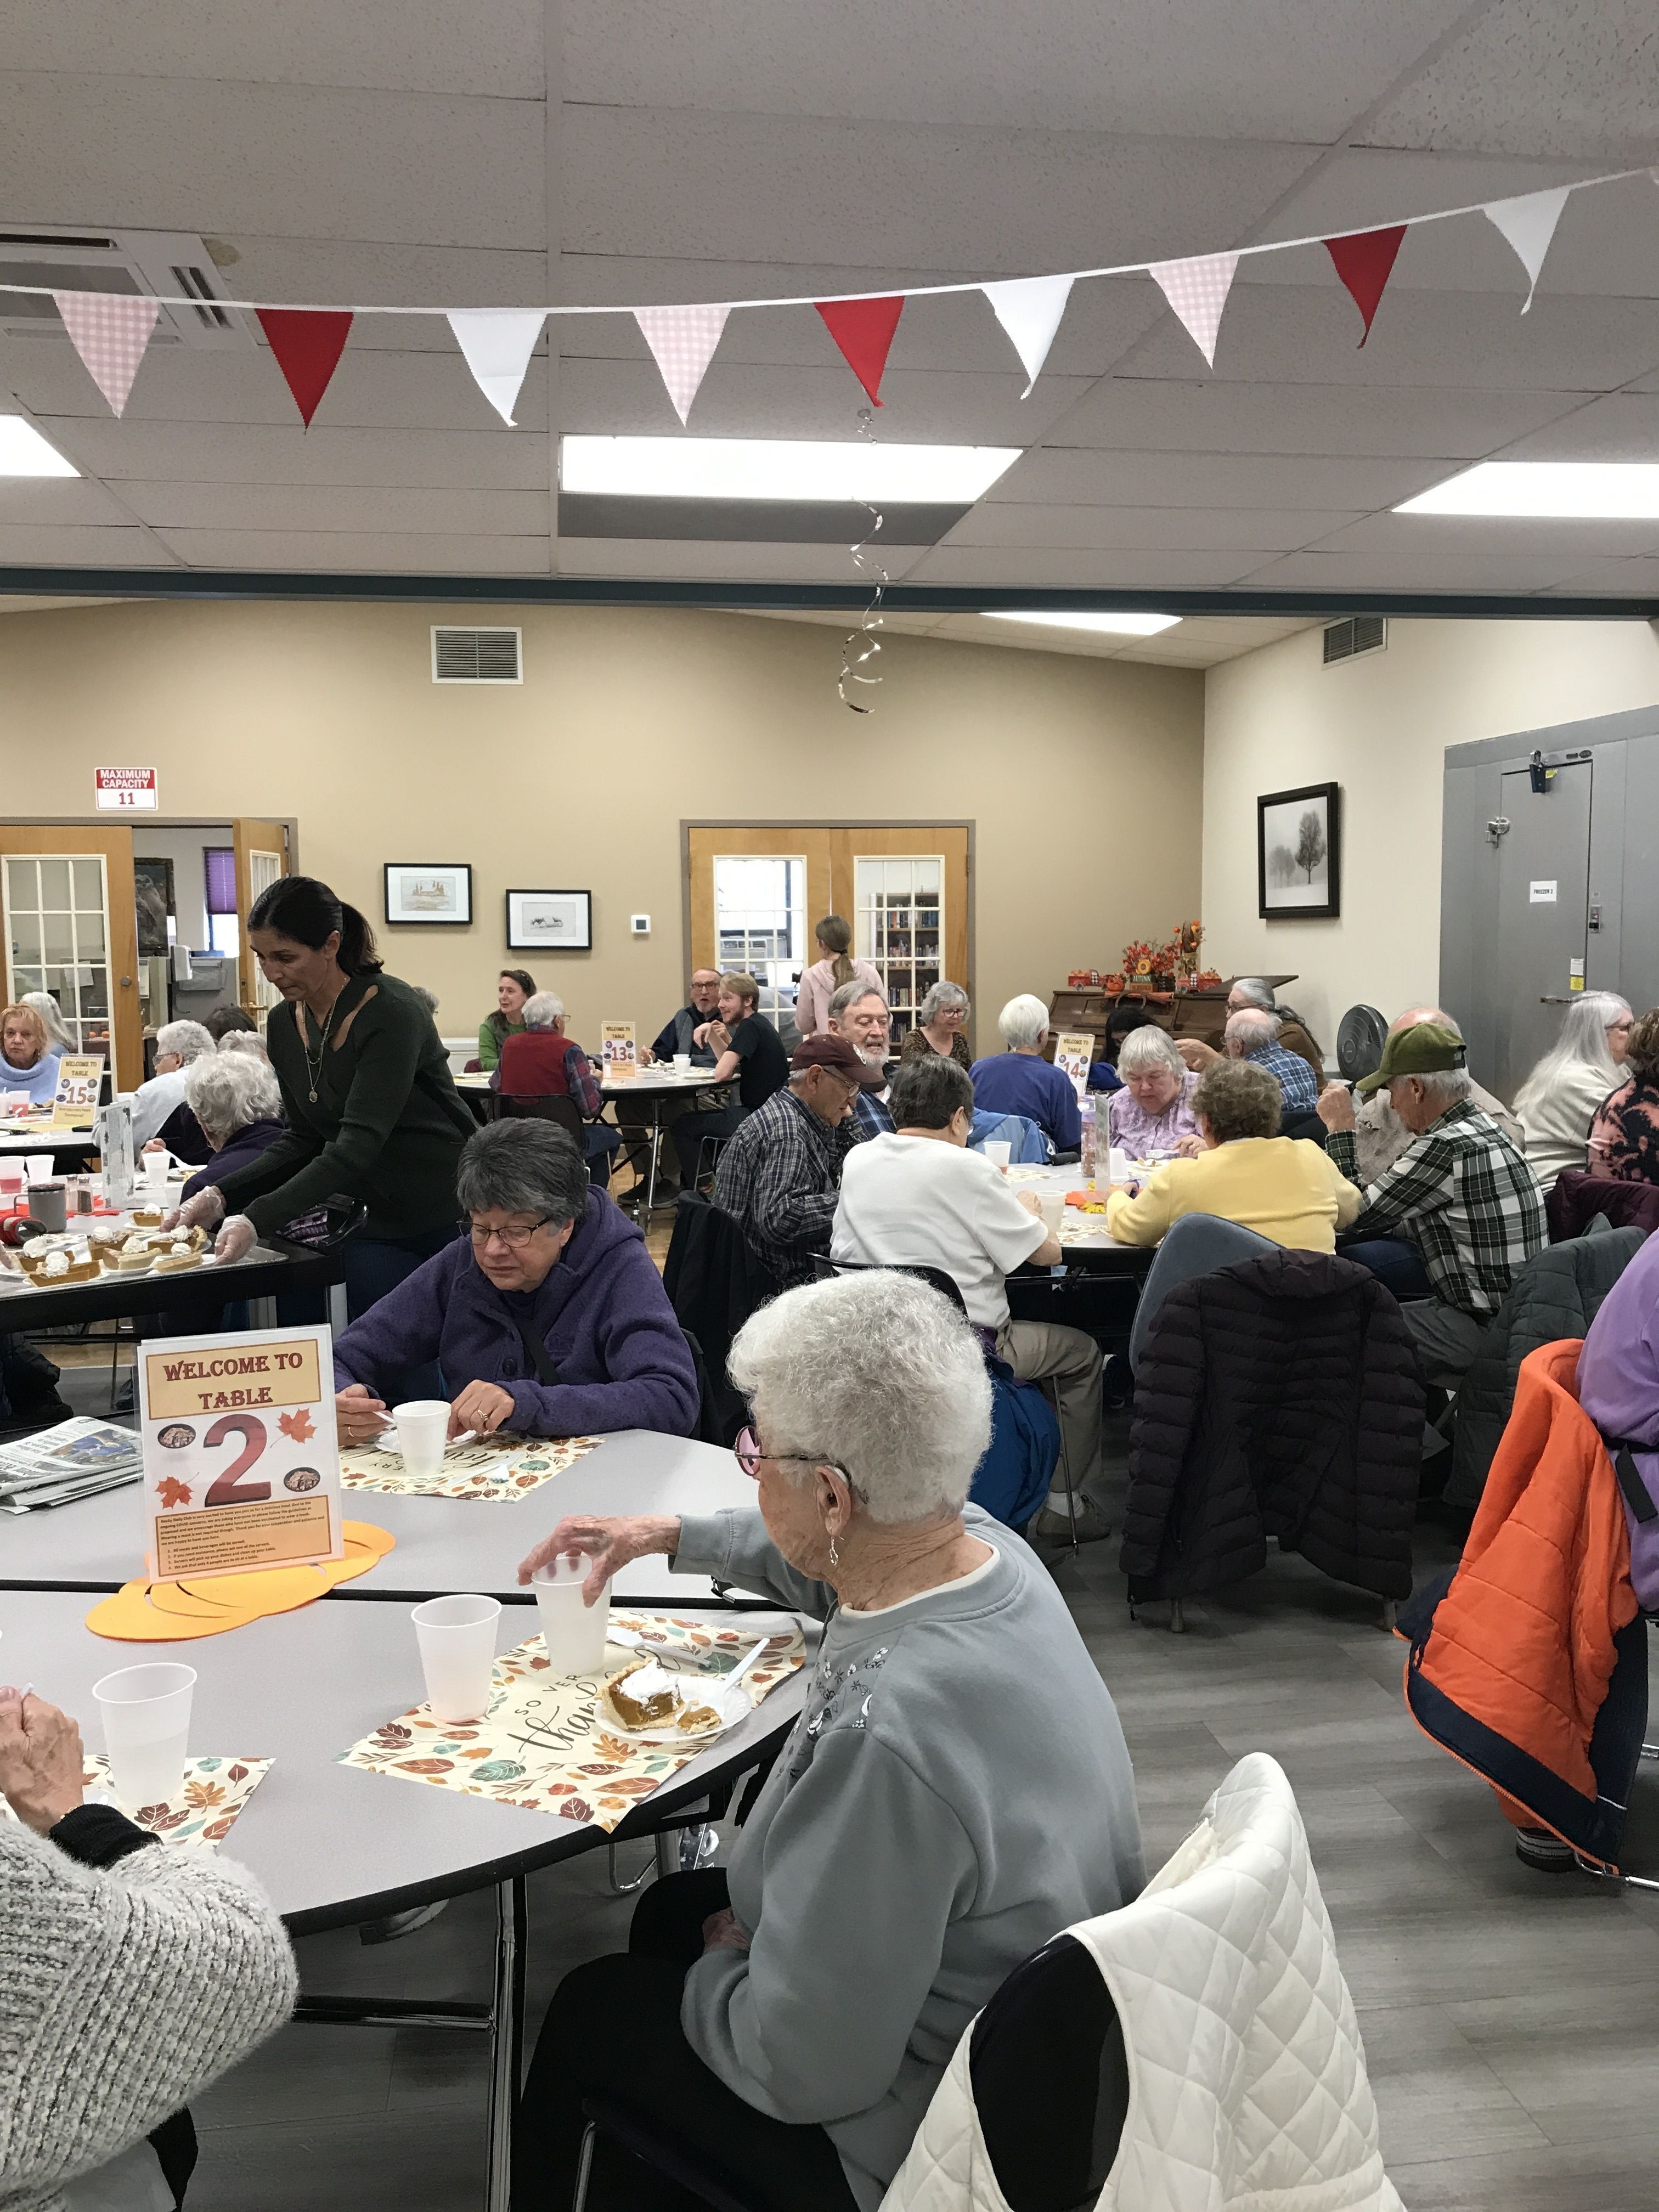 Pictured: A packed senior center on St. Patrick's Day. 